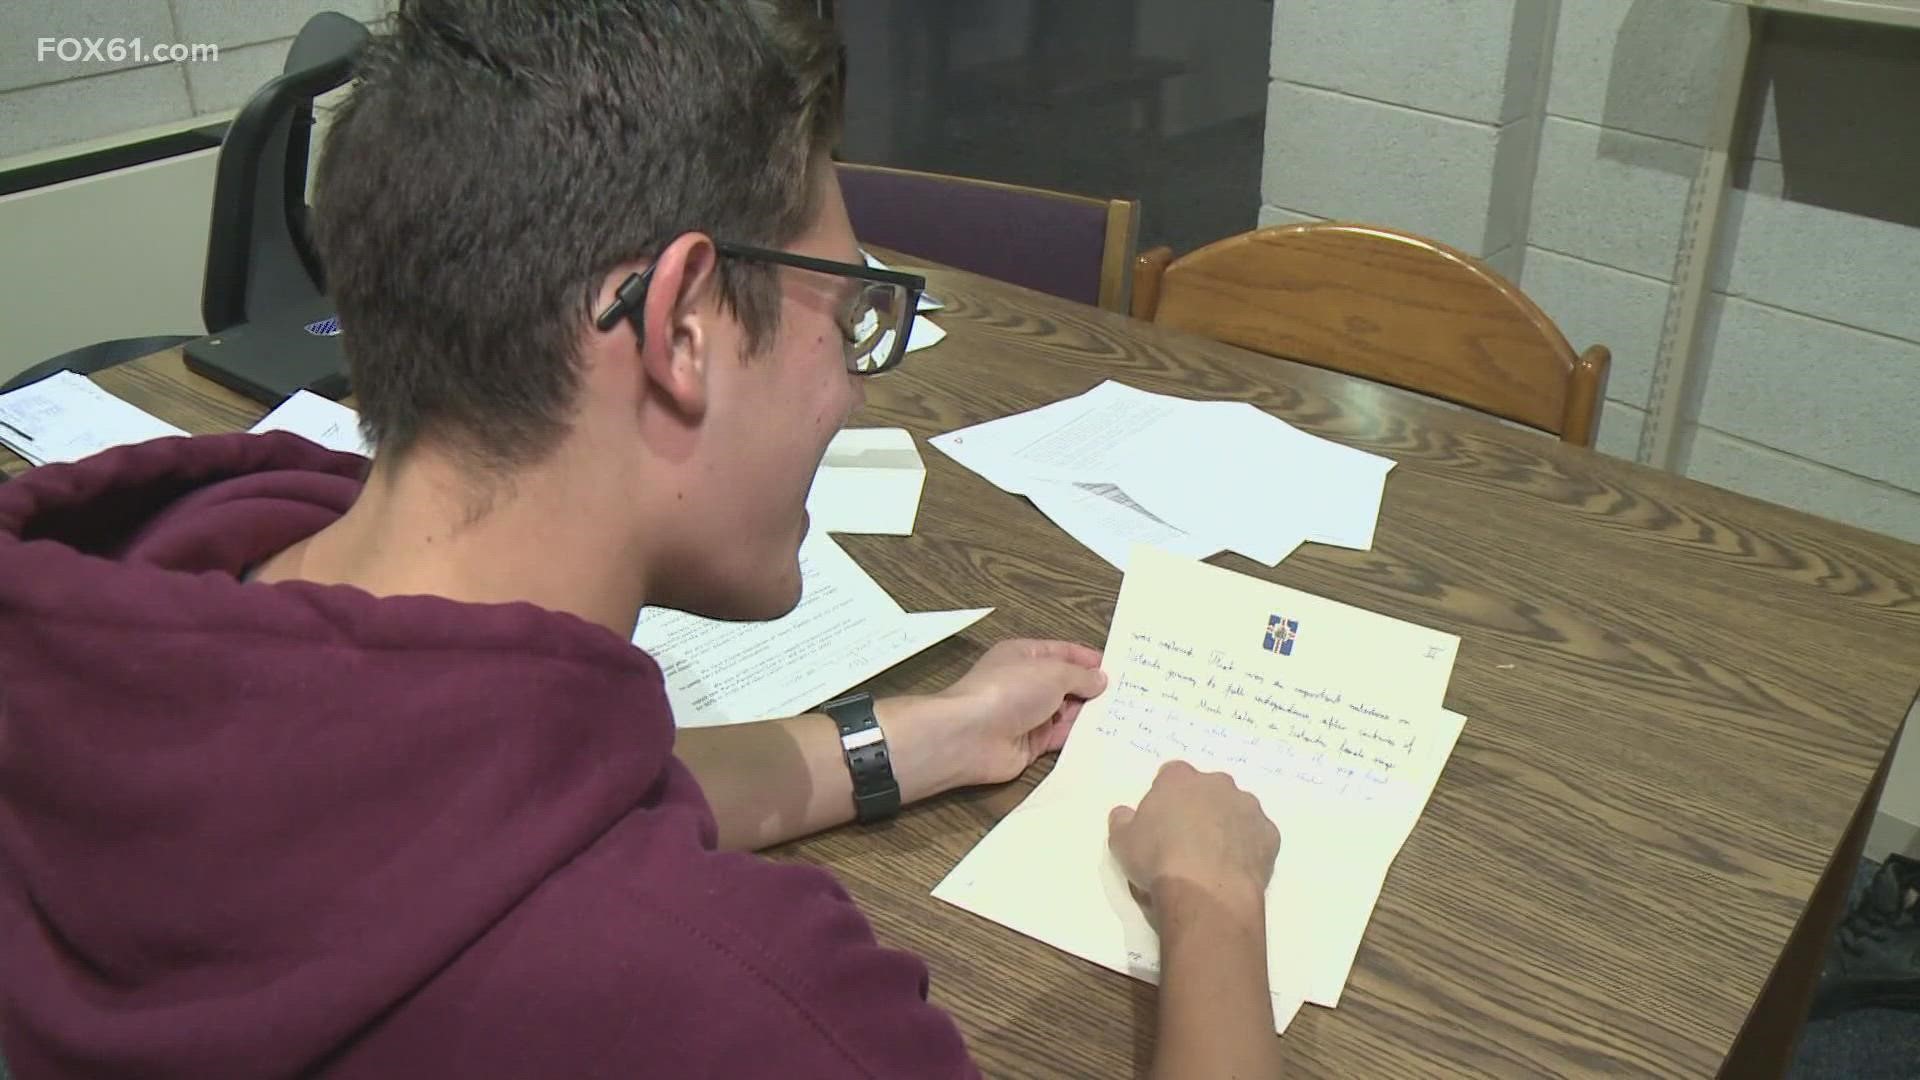 The South Windsor teen sent letters to 186 countries and received 20 responses so far.